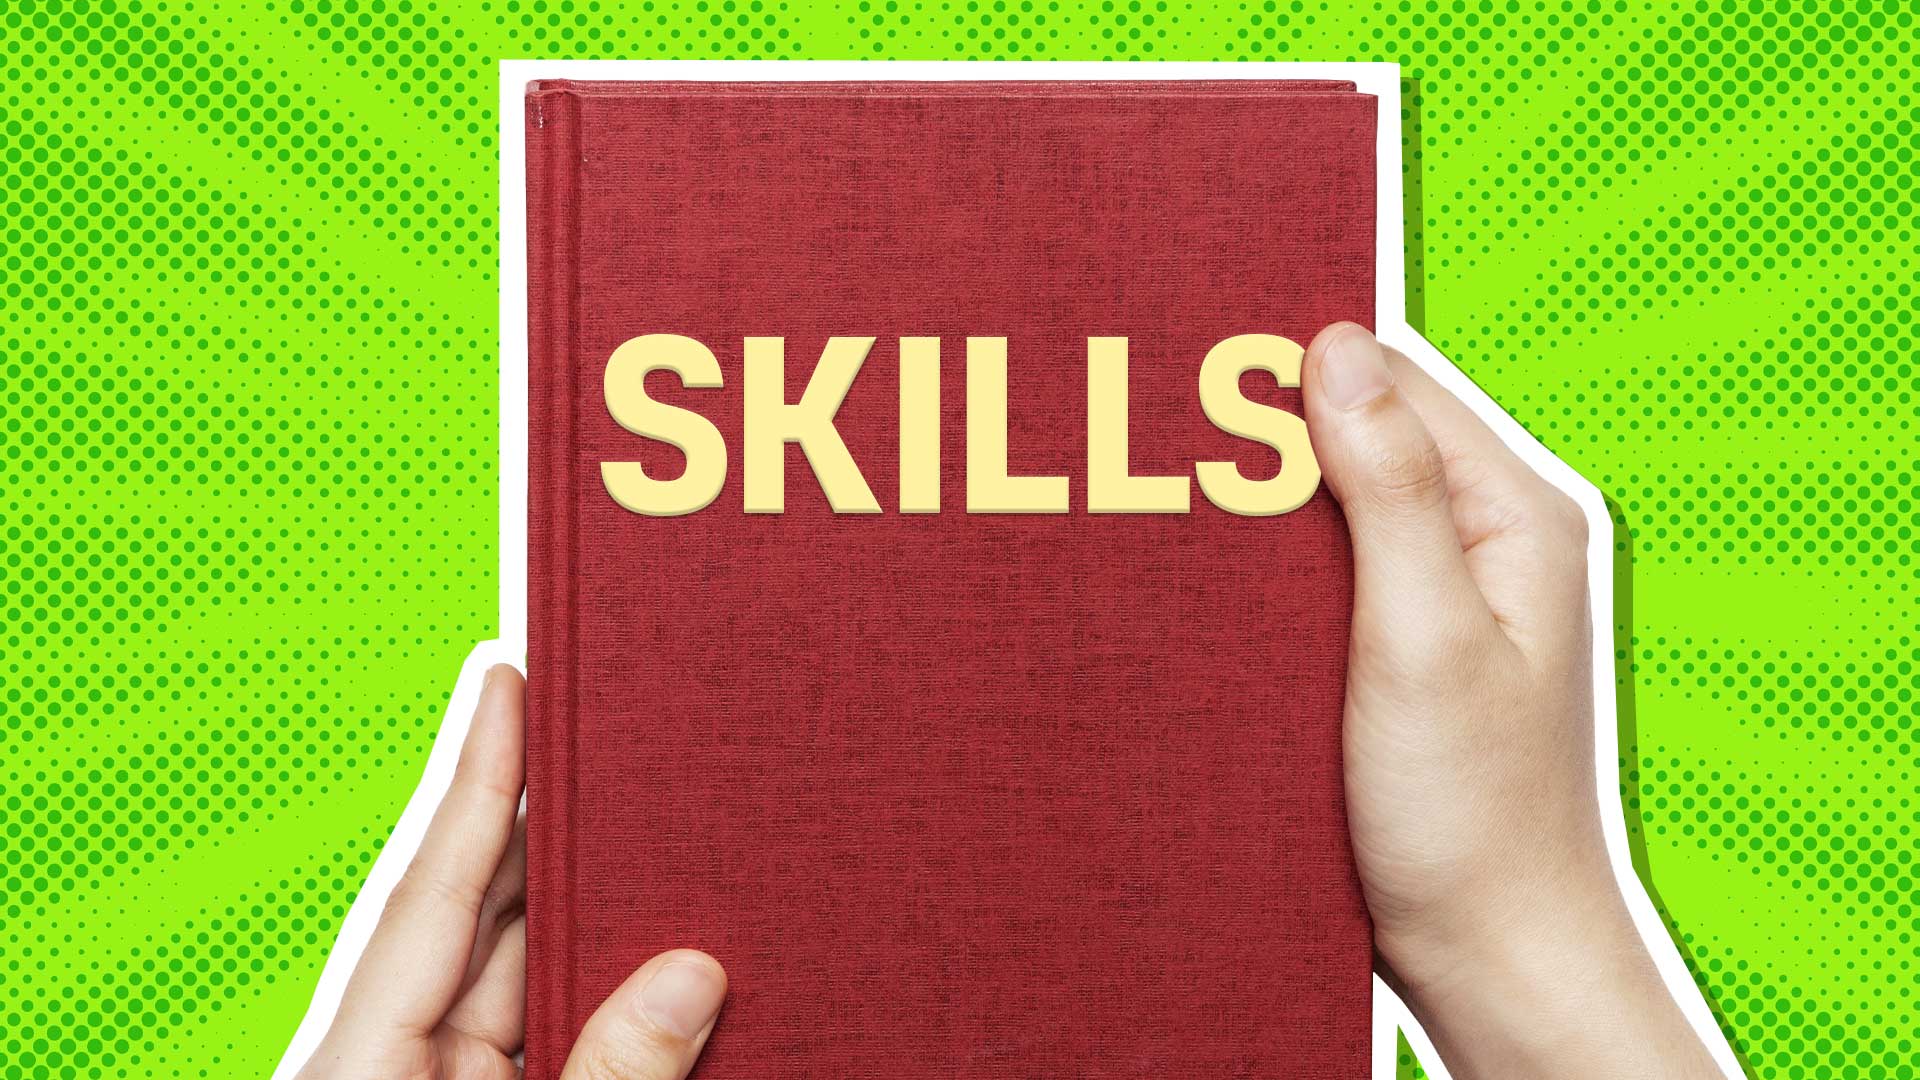 A book about skills